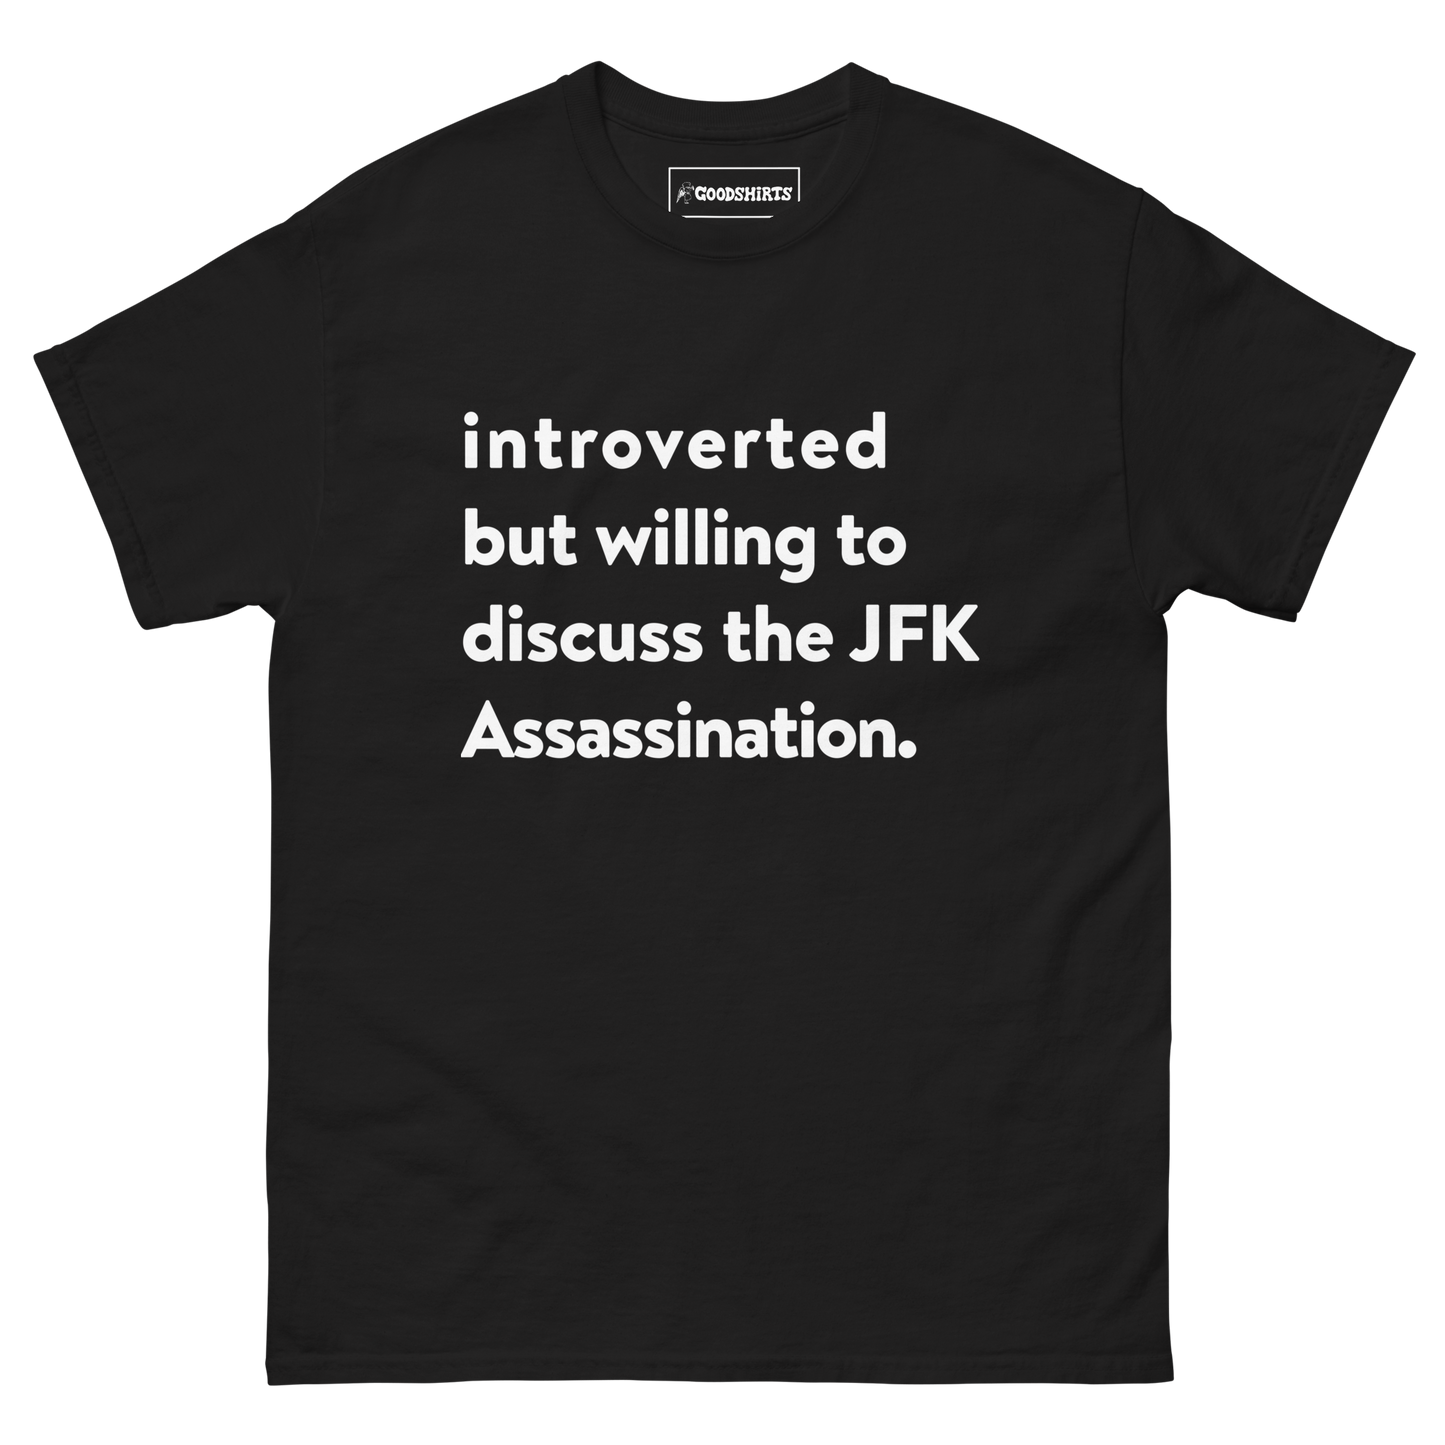 Introverted But Willing To Discuss The JFK Assassination.